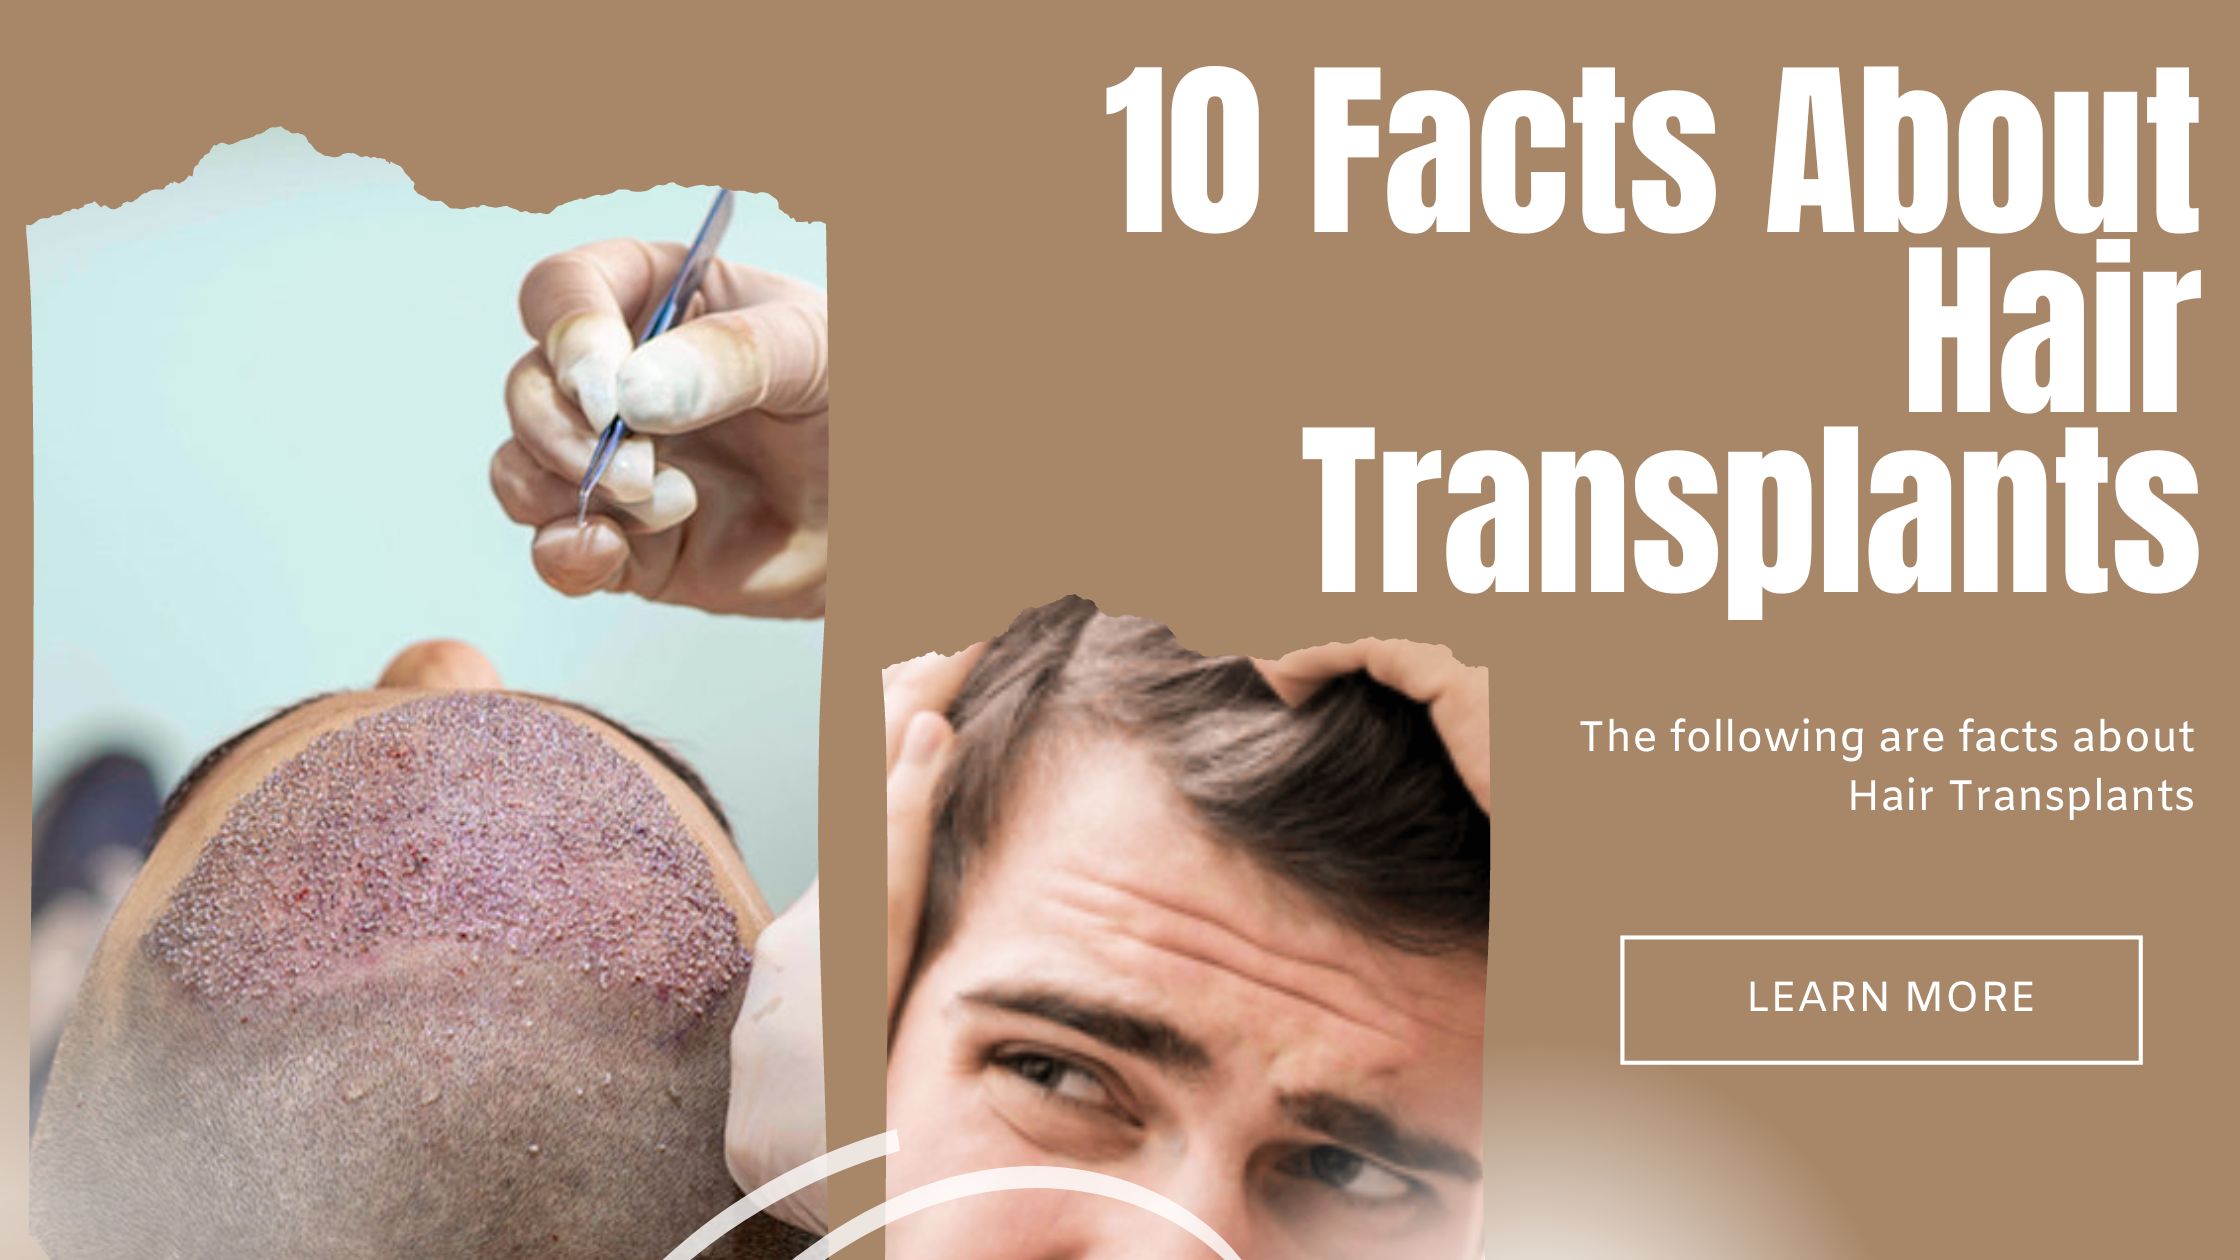 HERE ARE TEN KEY FACTS ABOUT HAIR TRANSPLANTS